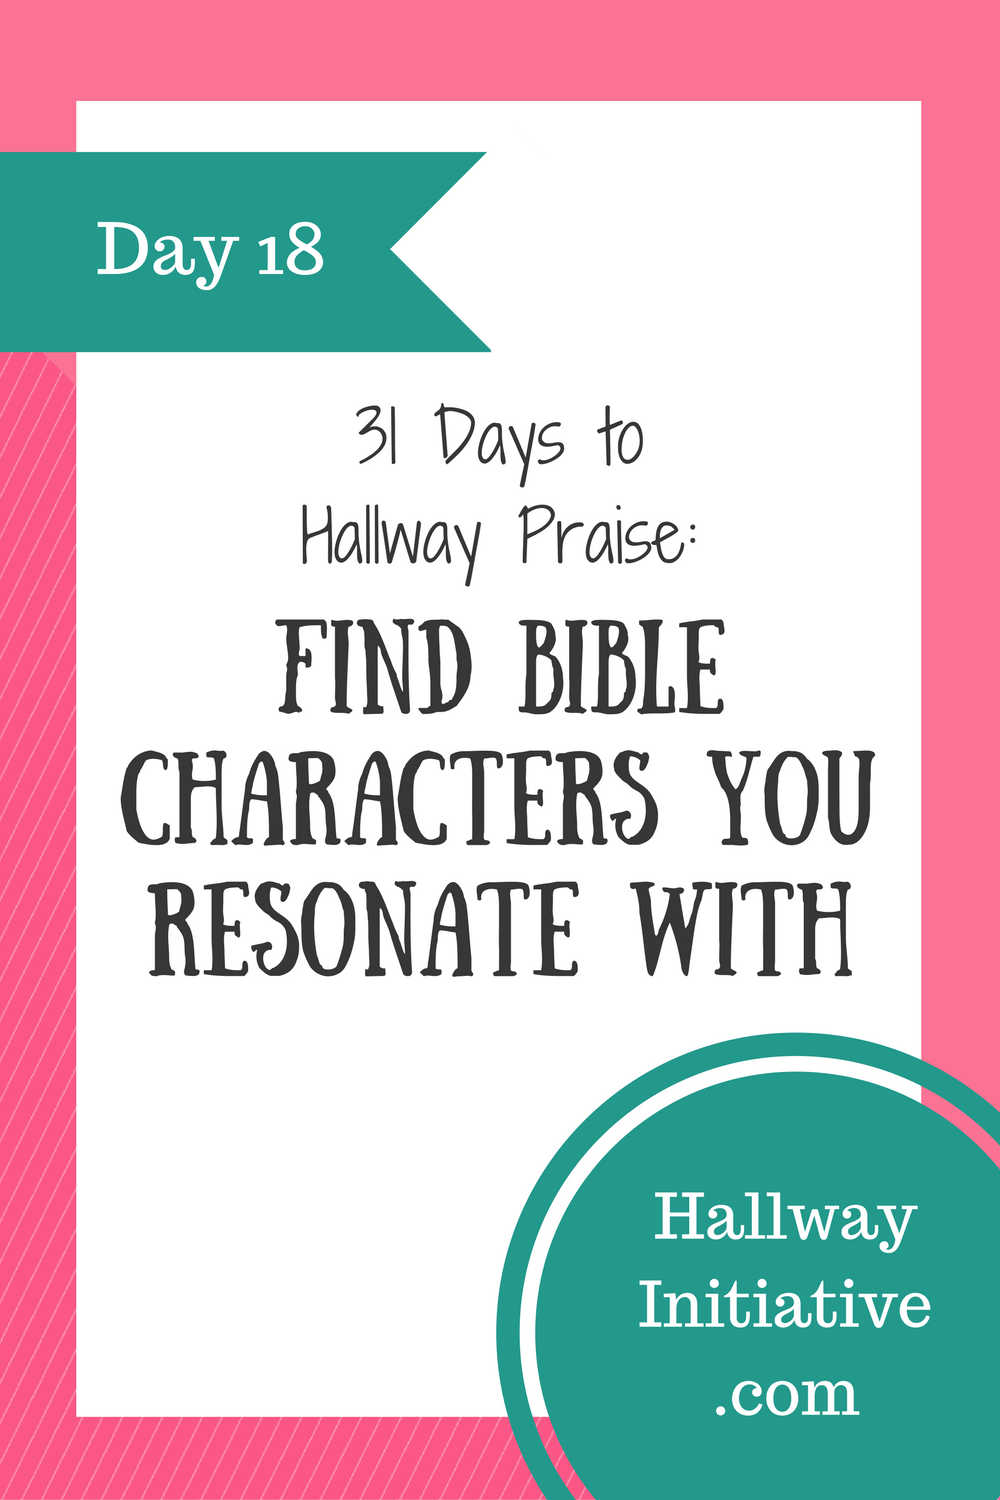 Day 18: find Bible characters you resonate with